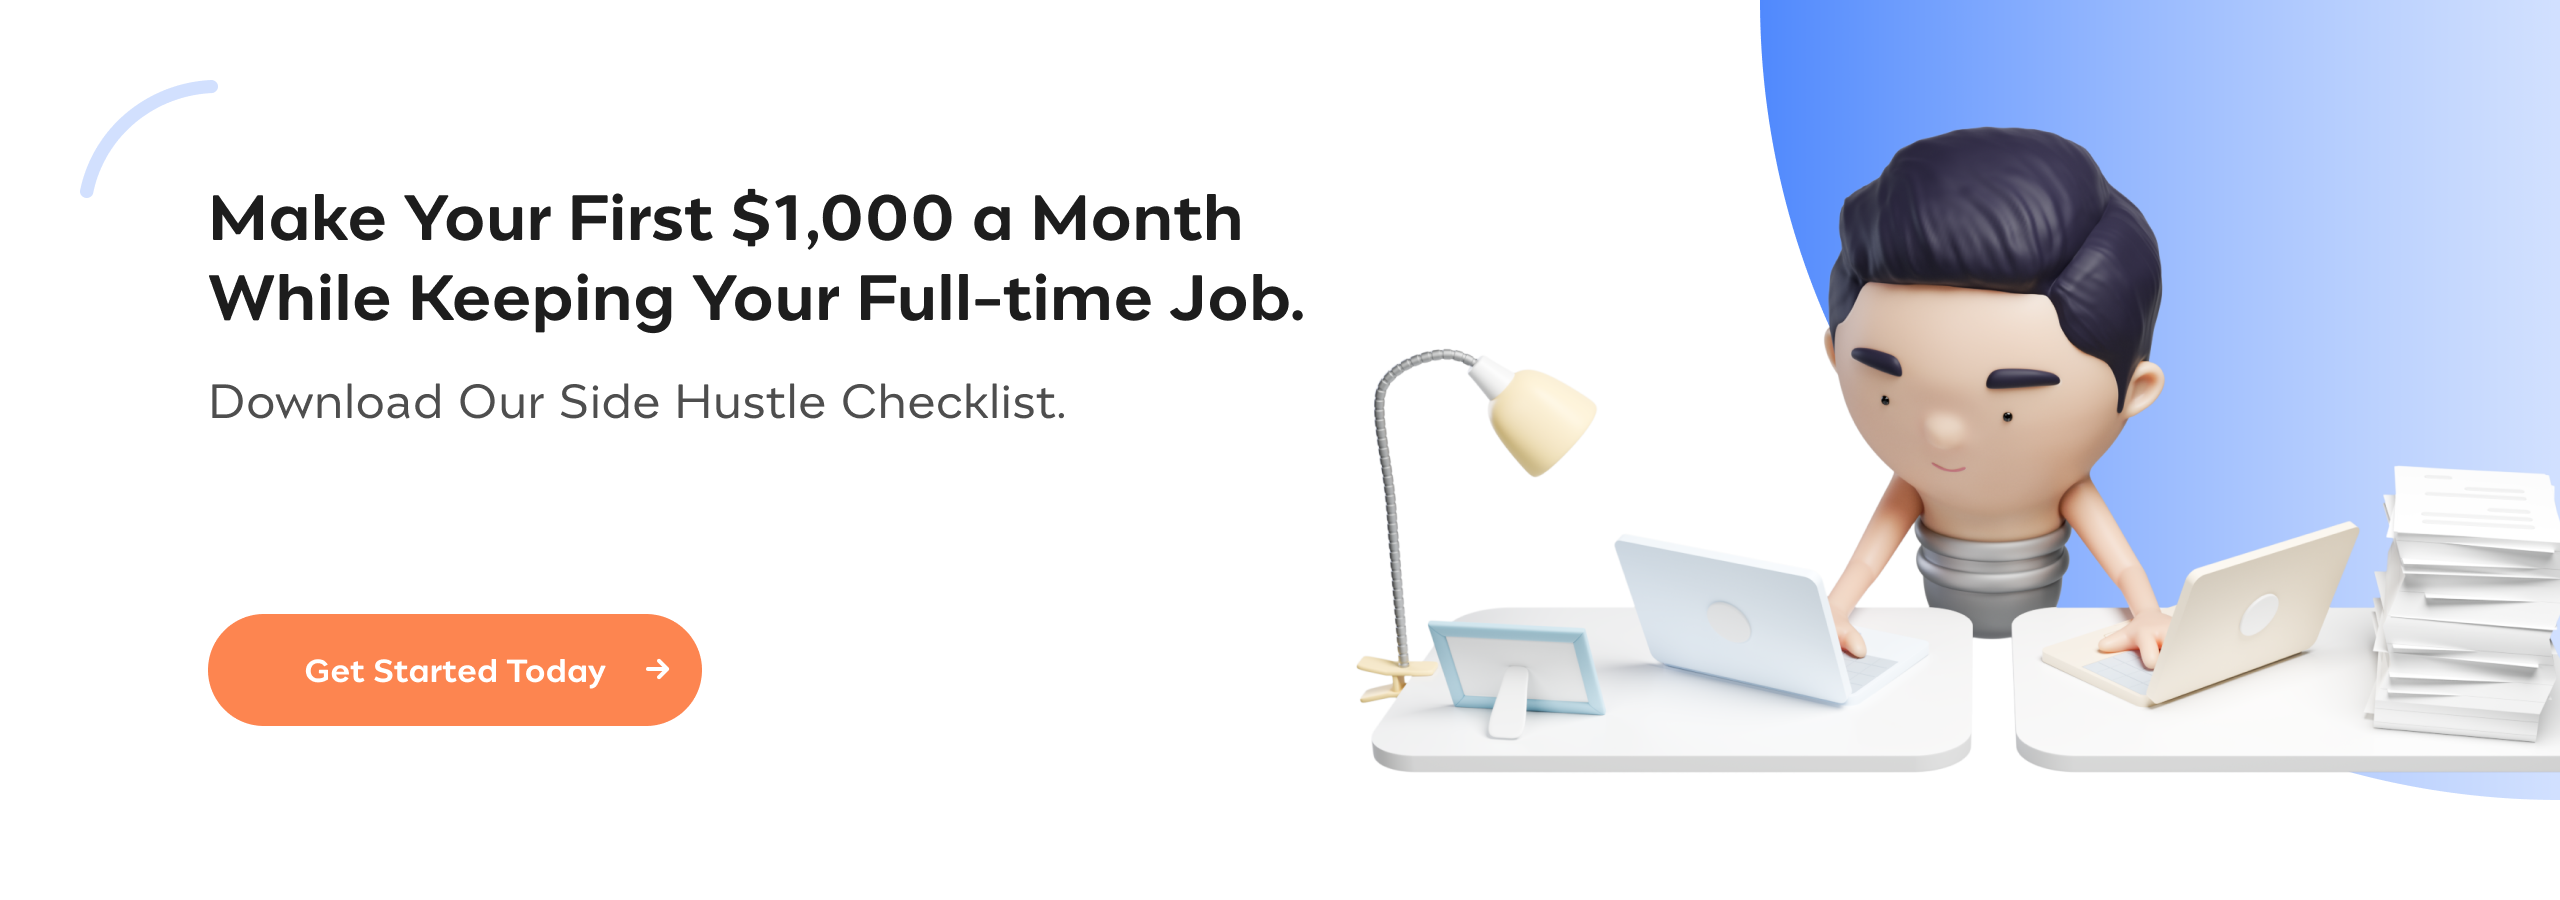 Make Your First $1,000 a Month While Keeping Your Full-time Job. Download Our Side Hustle Checklist.